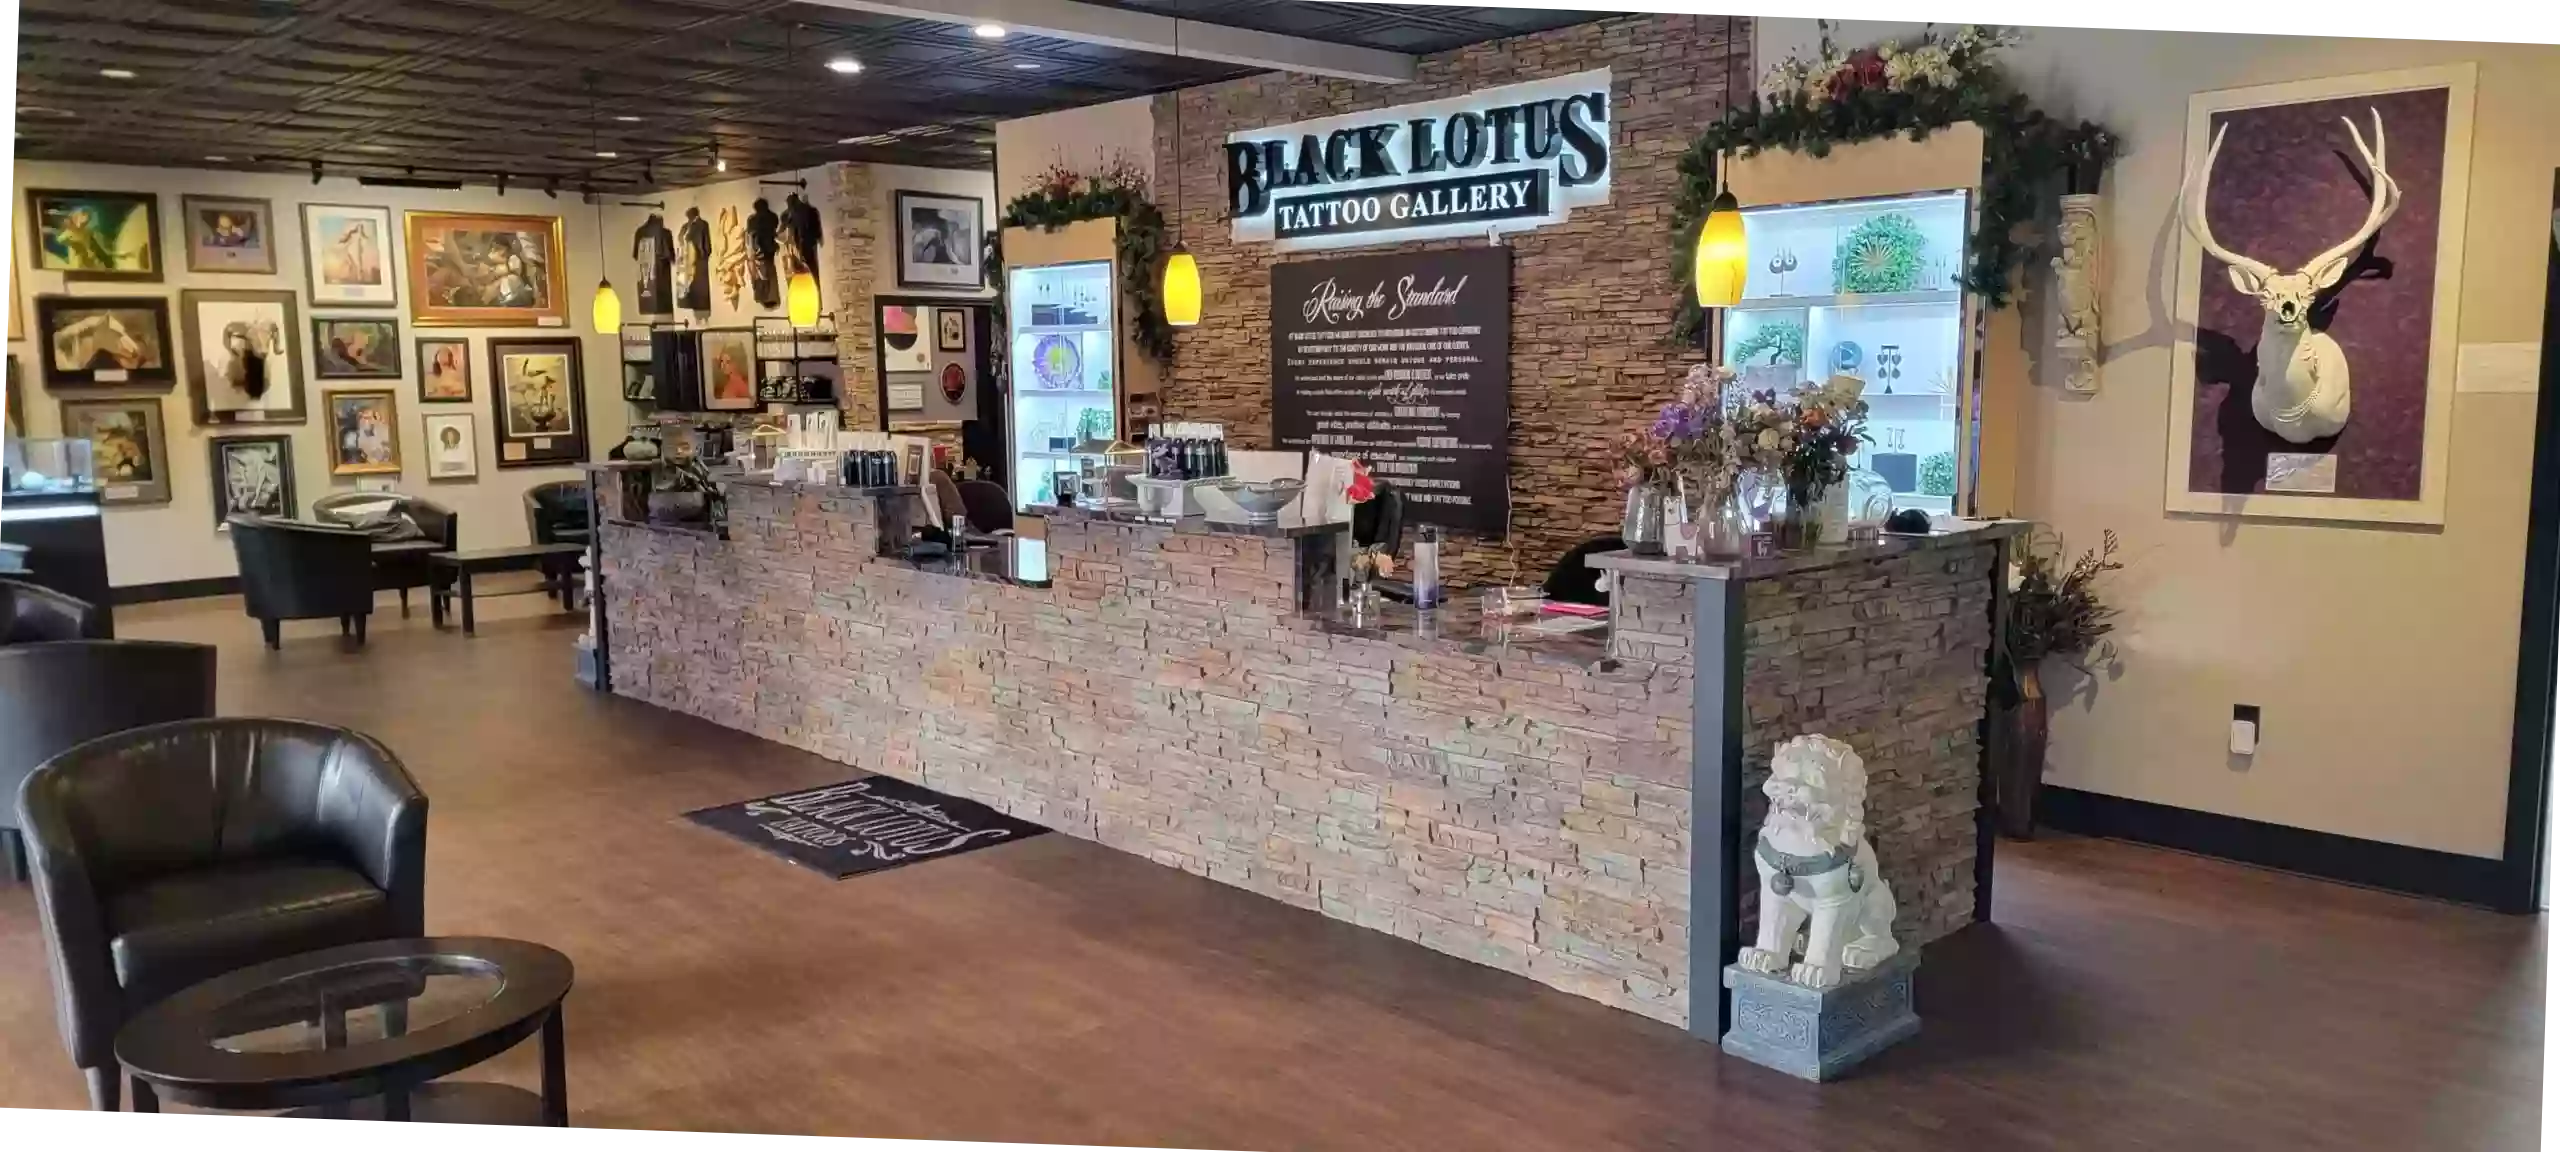 Black Lotus Tattoos, Removal, Body Piercing, and Art Gallery